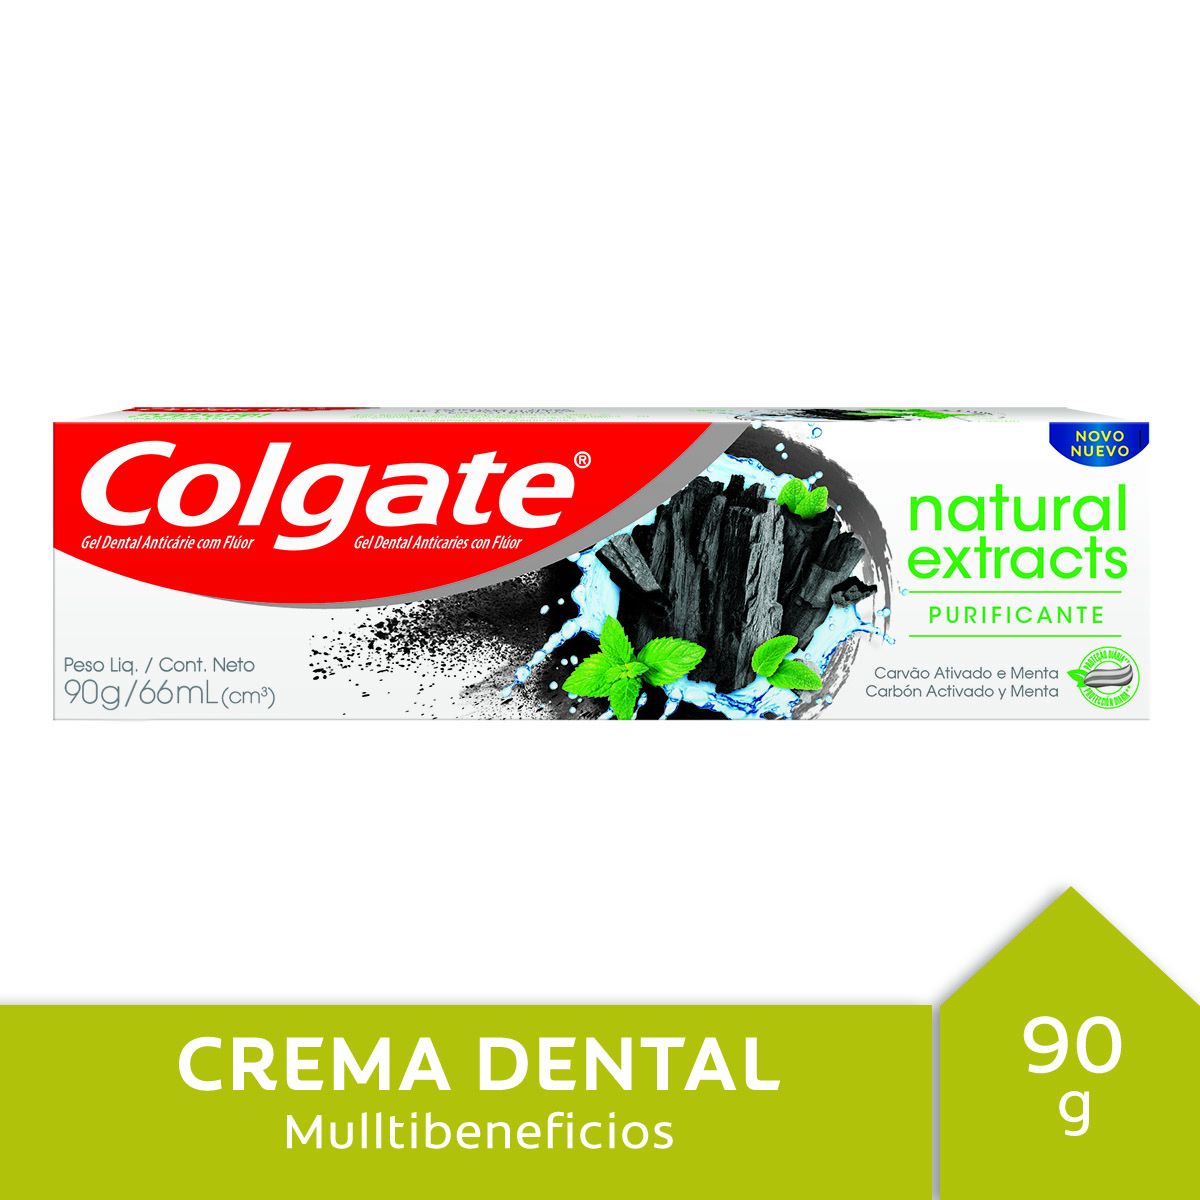 GEL DENTAL COLGATE NATURAL EXTRACTS CARBON PURIFICANTE 90 GR